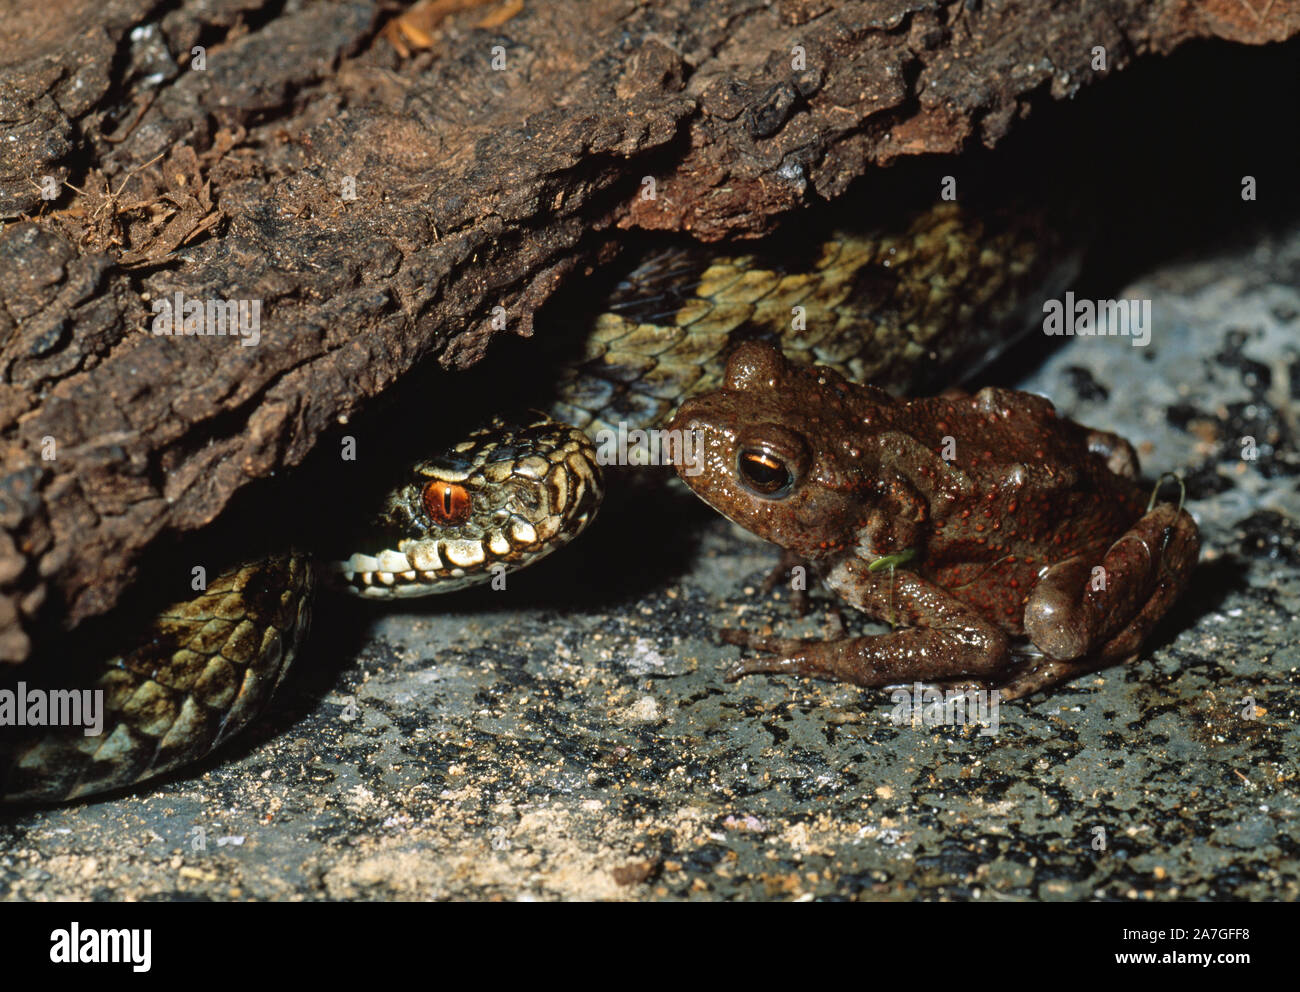 ADDER meeting Common Toad  Vipera berus berus & Bufo bufo below ground . Adders will eat toads despite skin toxin glands and warts. Stock Photo